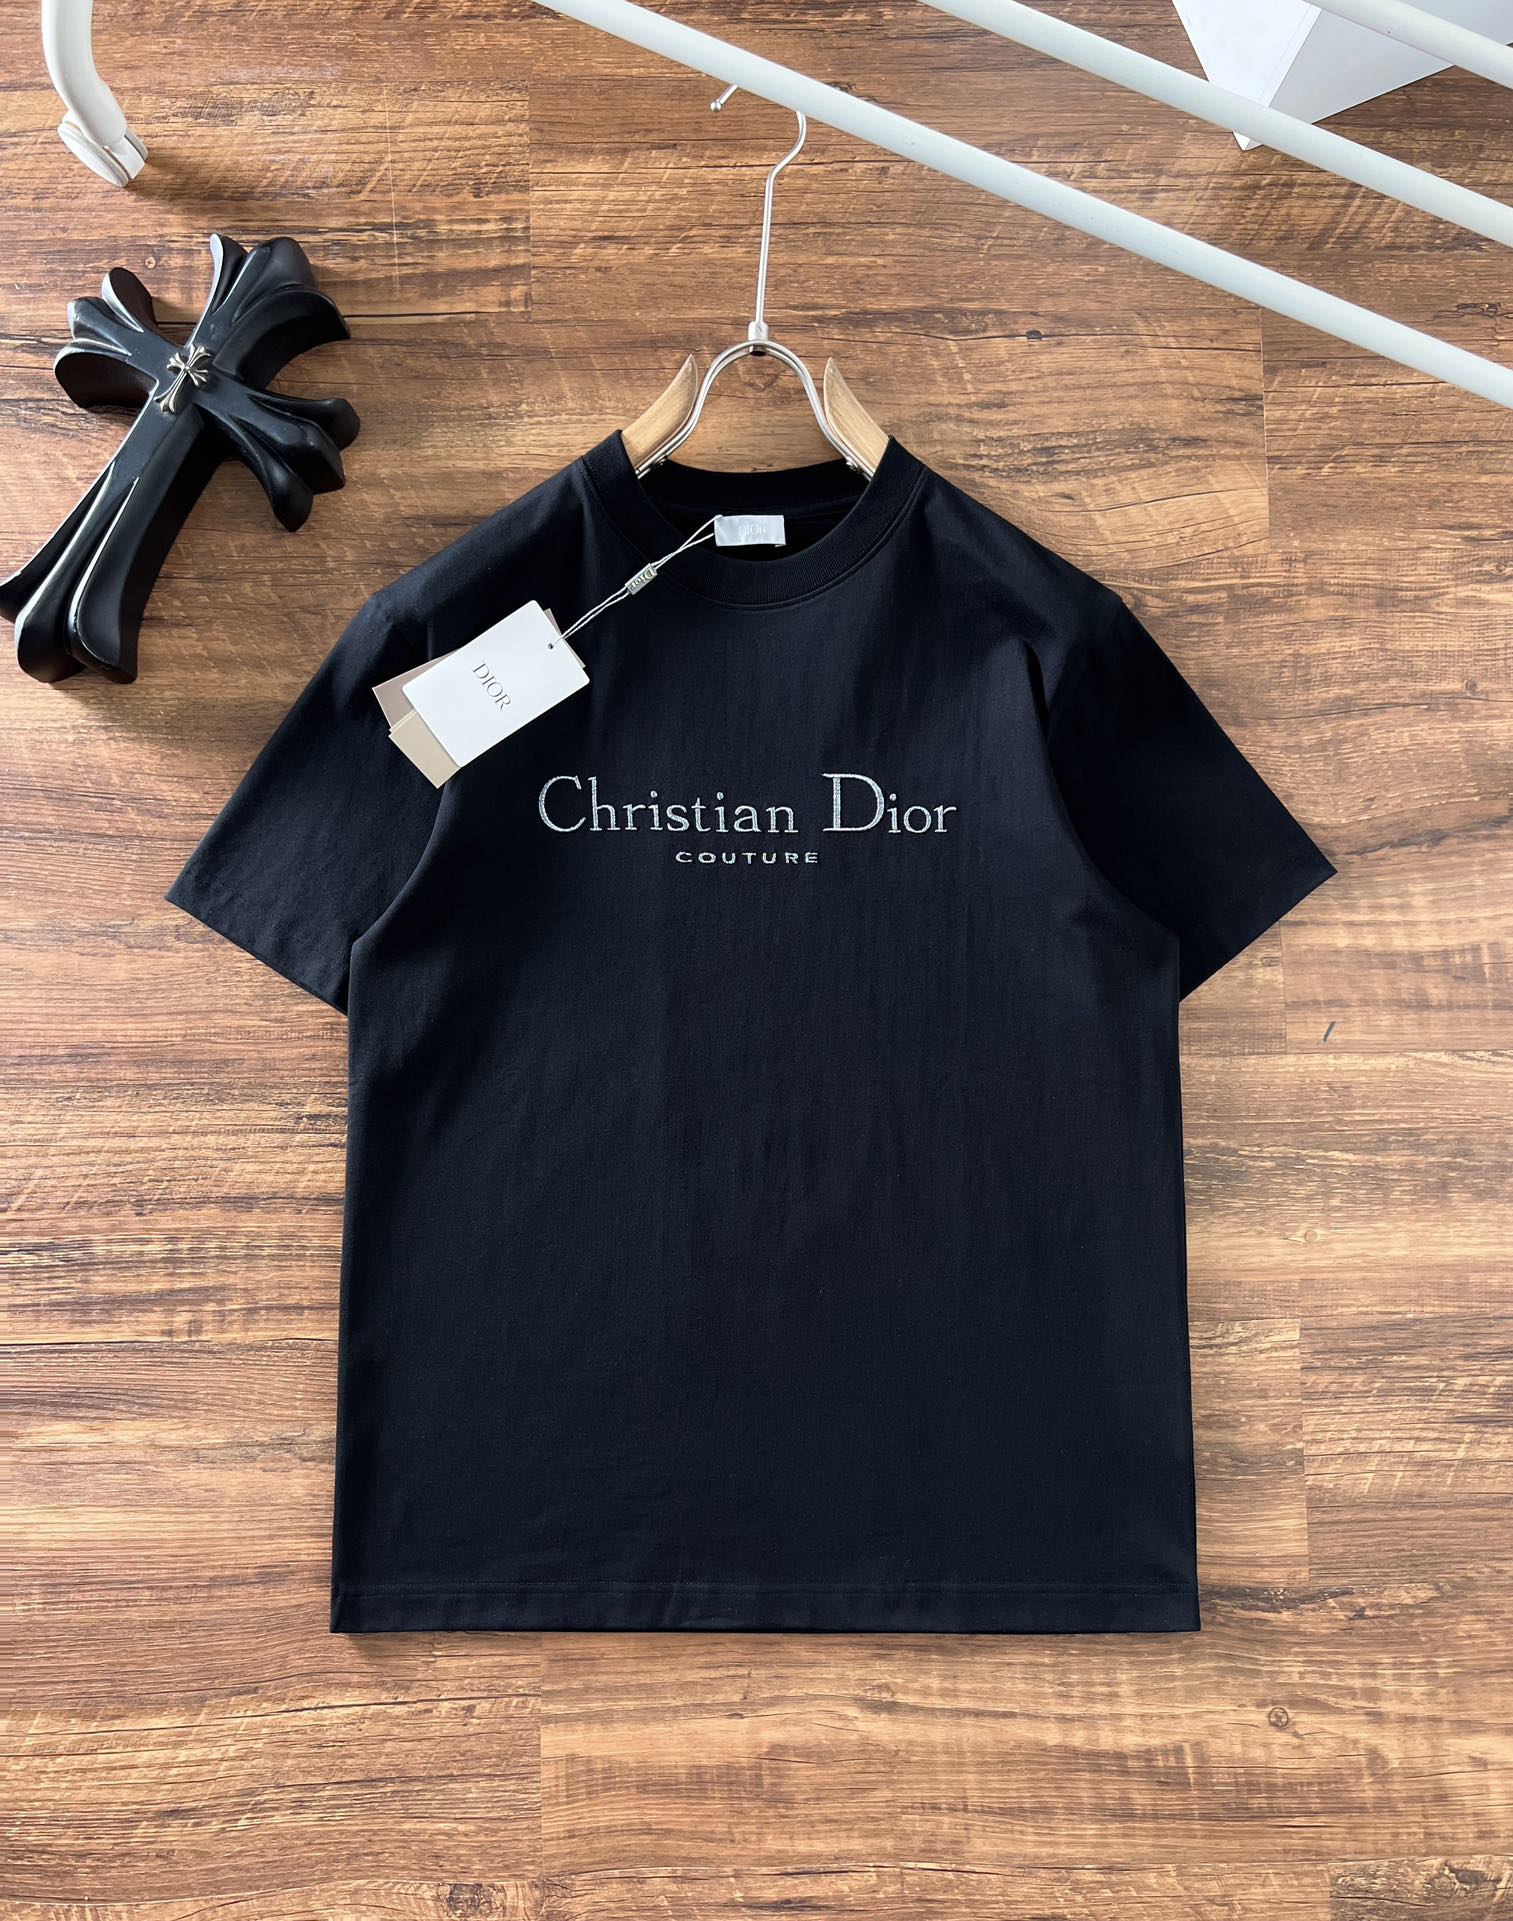 Dior mirror quality
 Clothing T-Shirt Buy best quality Replica
 White Embroidery Cotton Knitting Spring/Summer Collection Short Sleeve